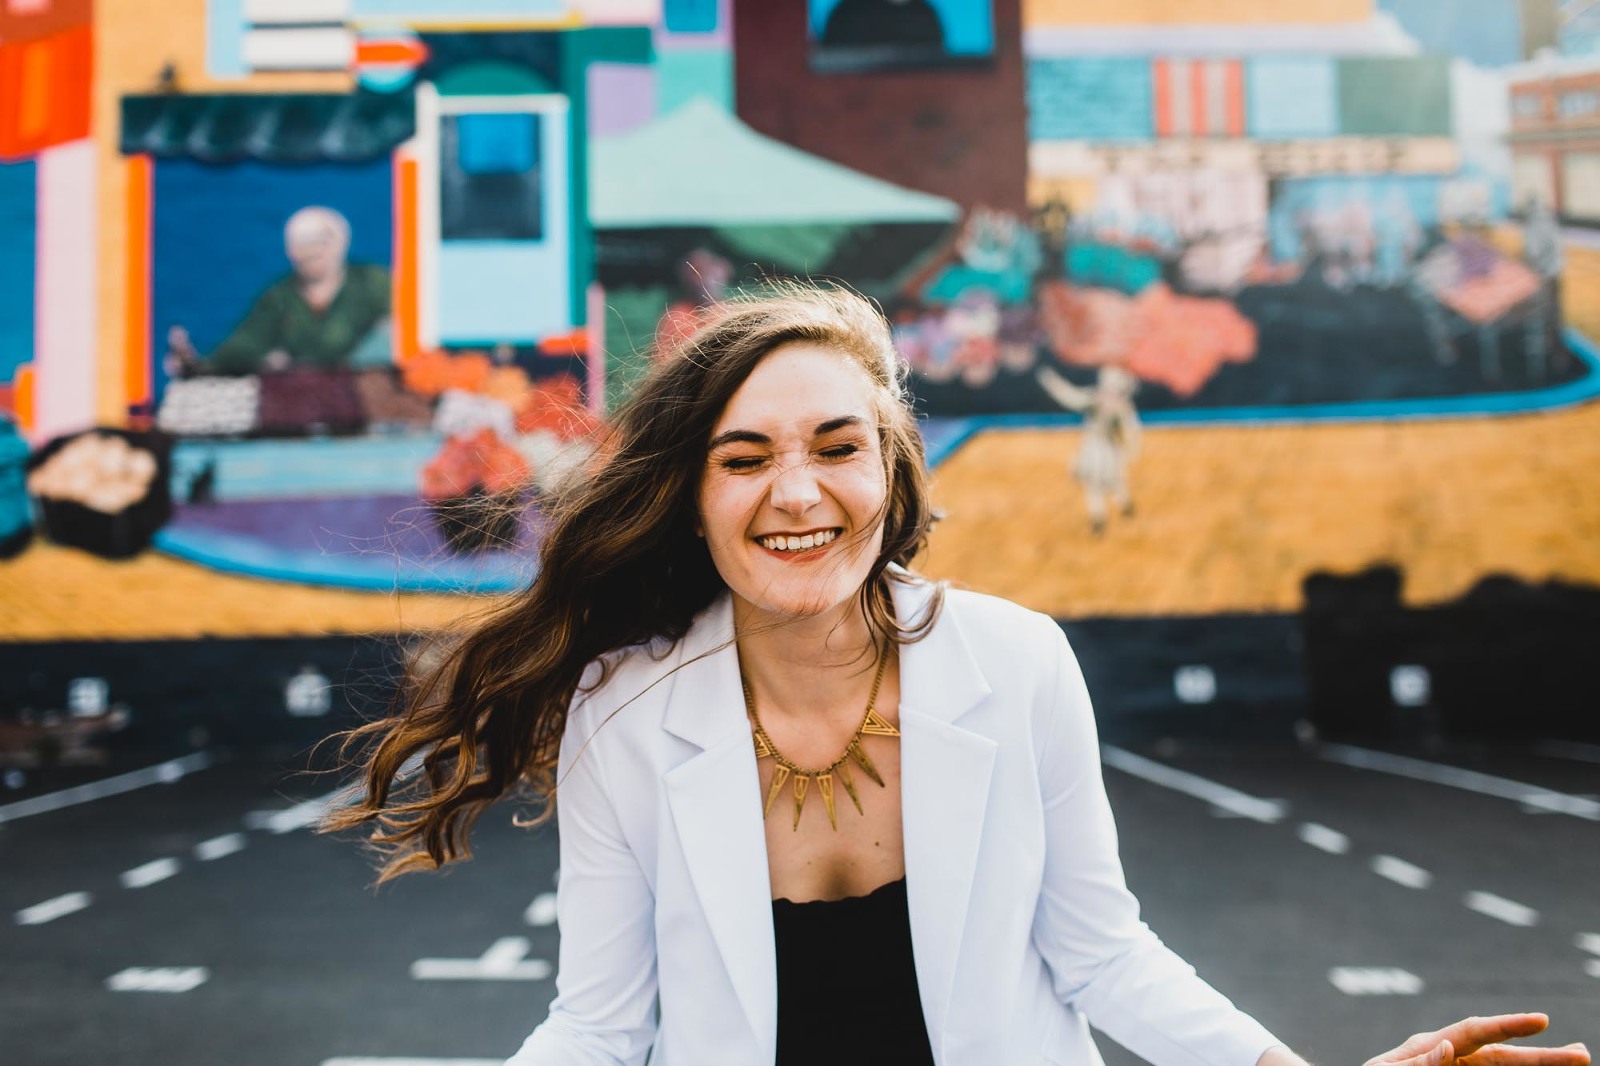 woman laughing with her hair blowing in the wind in front of a colorful mural